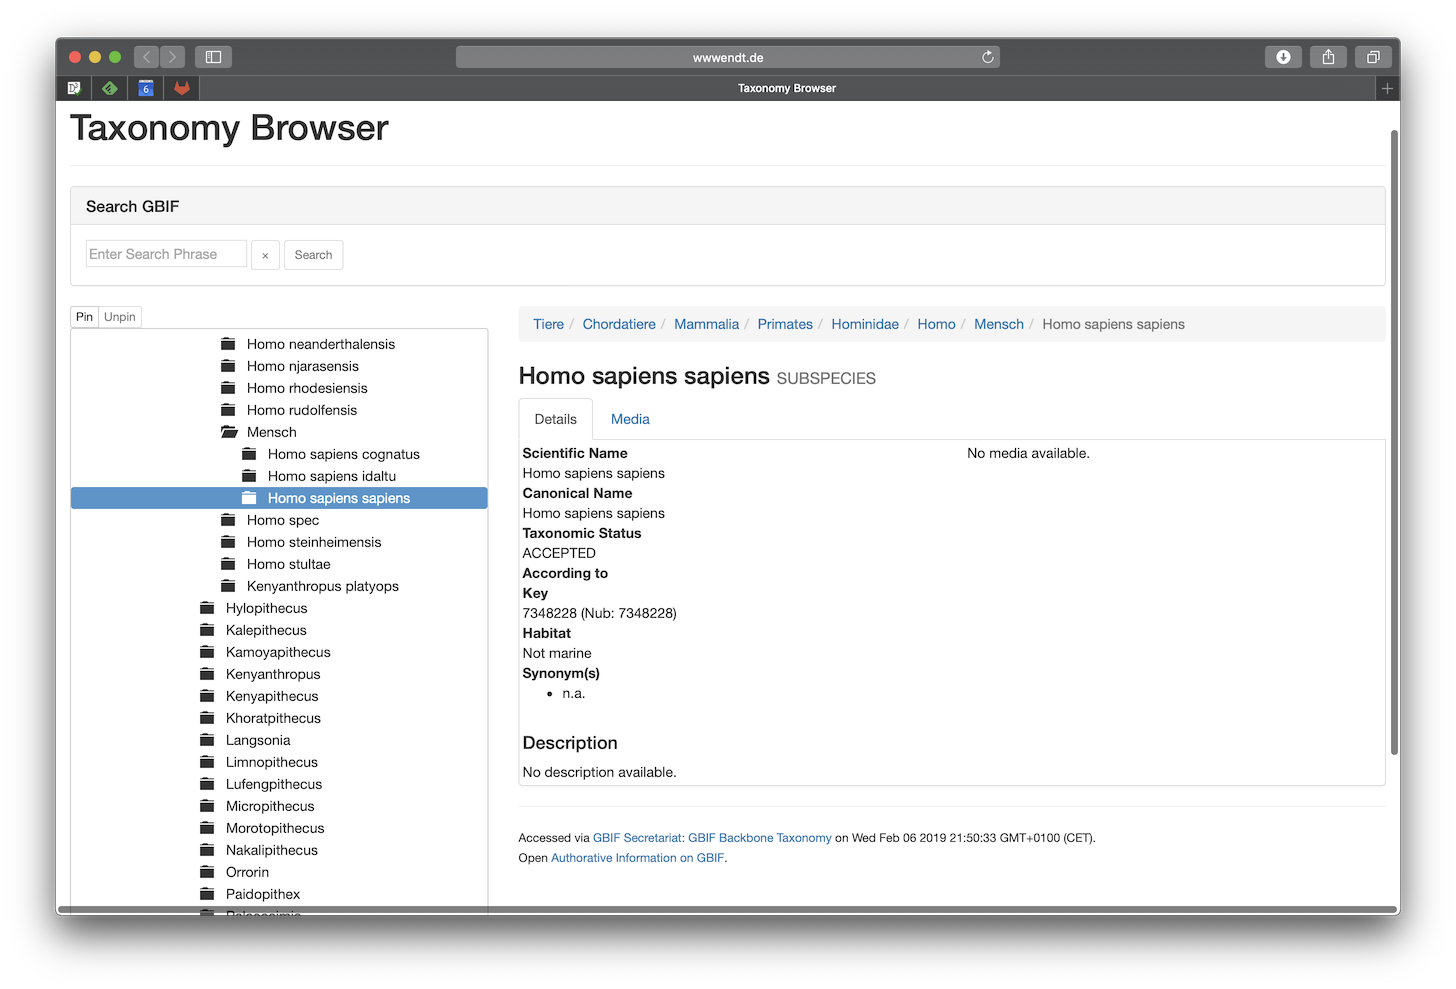 Taxonomy Browser